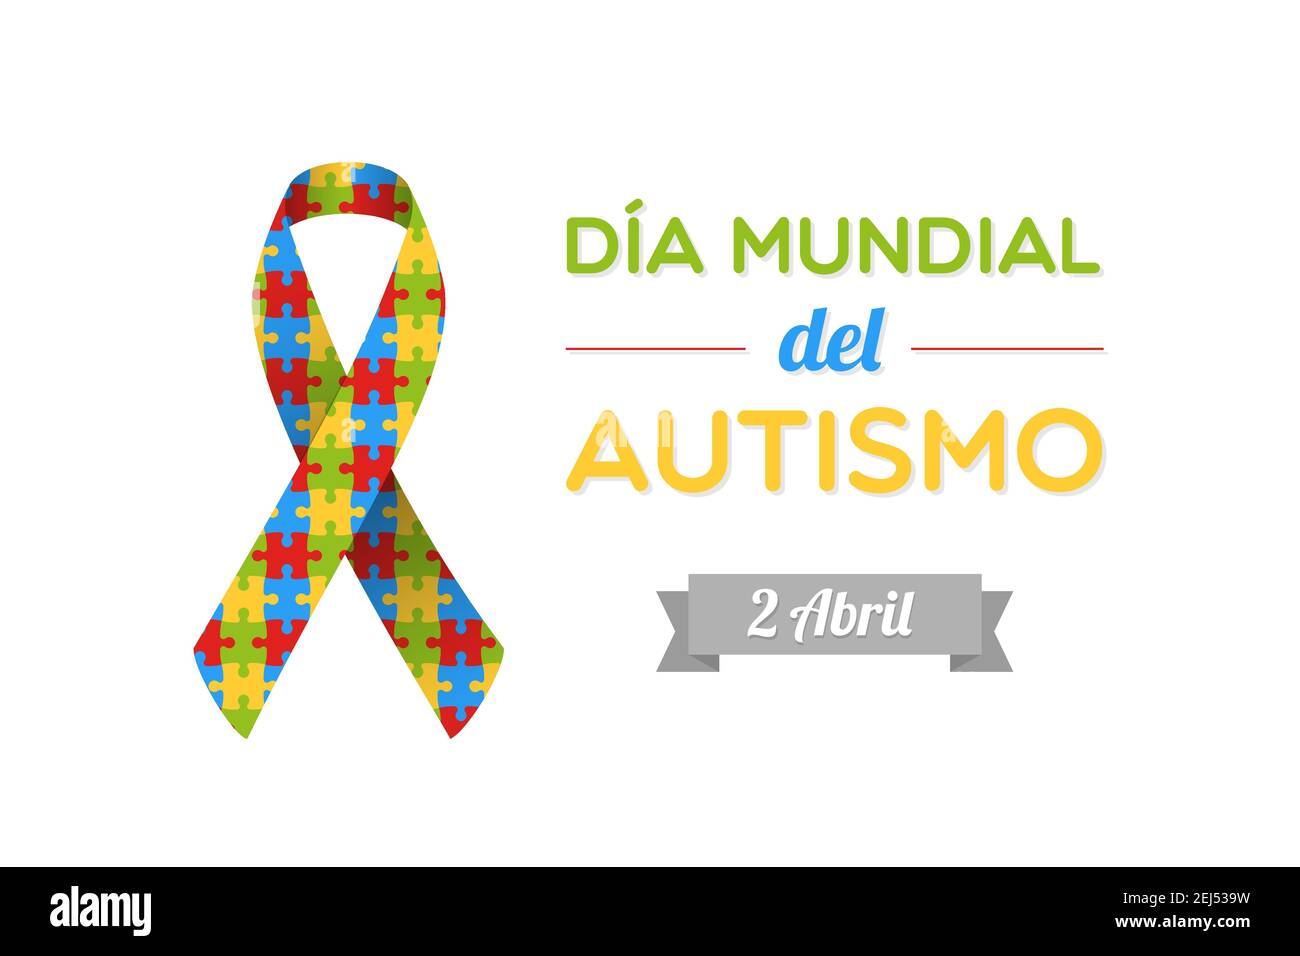 World Autism Day in Spanish. Dia mundial del autismo. Autism awareness ribbon with colorful puzzle pieces. Vector illustration, flat design Stock Vector